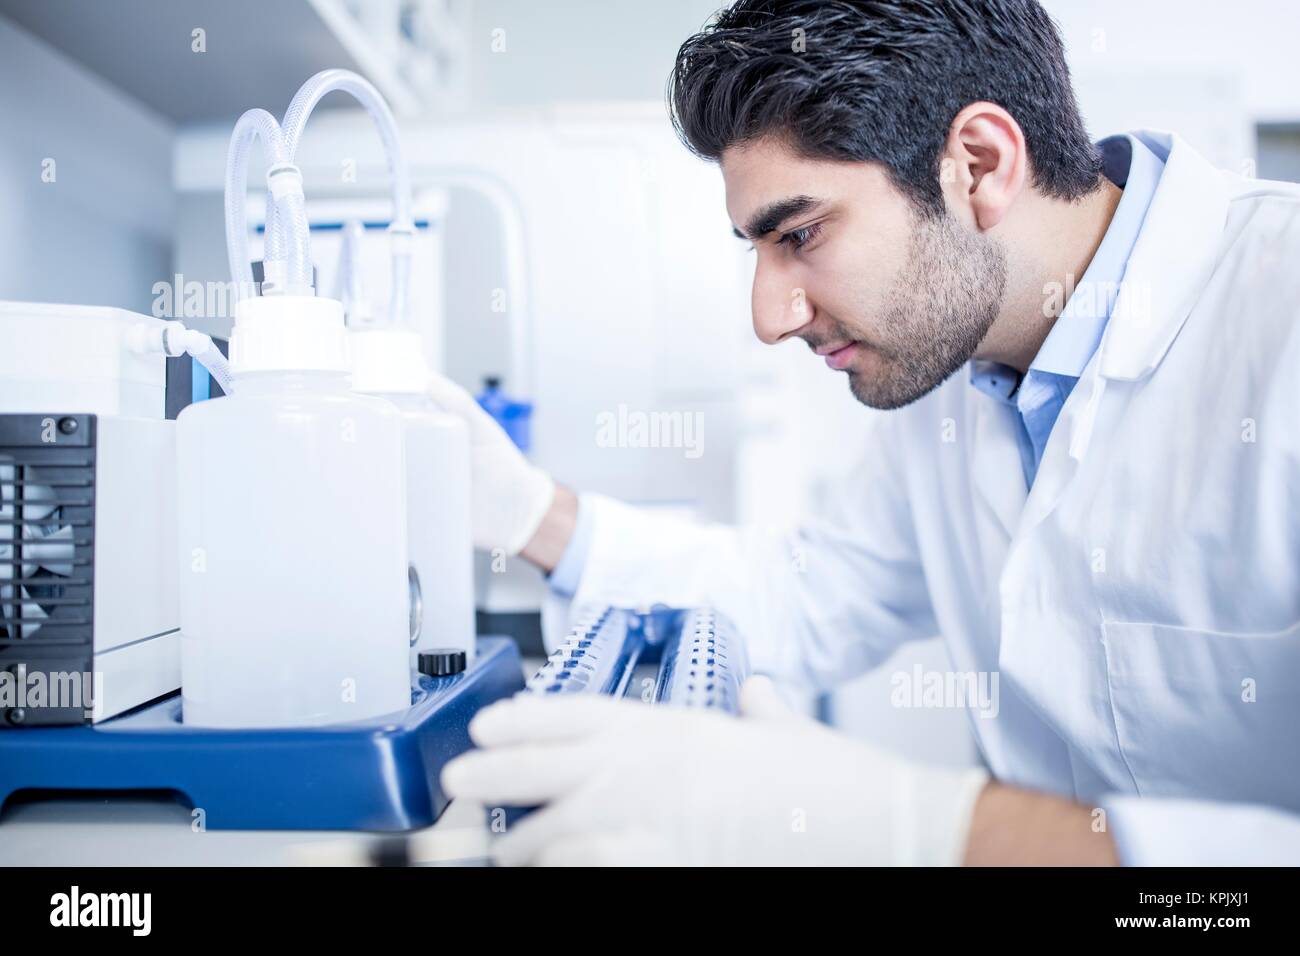 Male laboratory assistant using equipment. Stock Photo